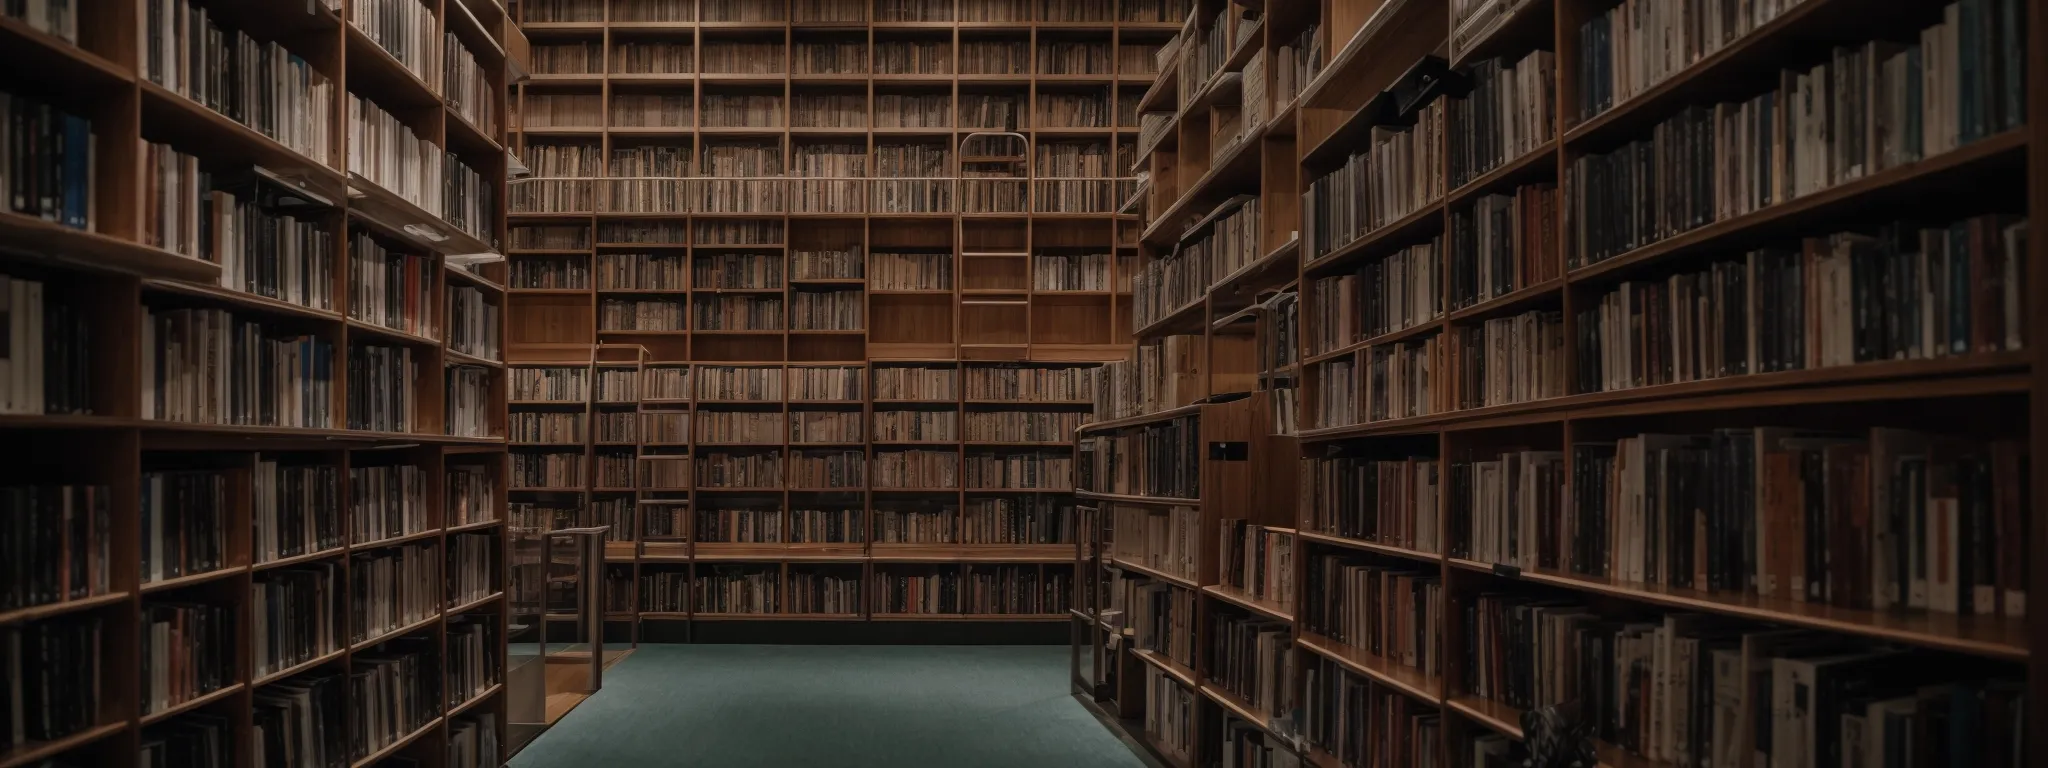 a neatly structured library with books aligned in categorized shelves, embodying organized information.